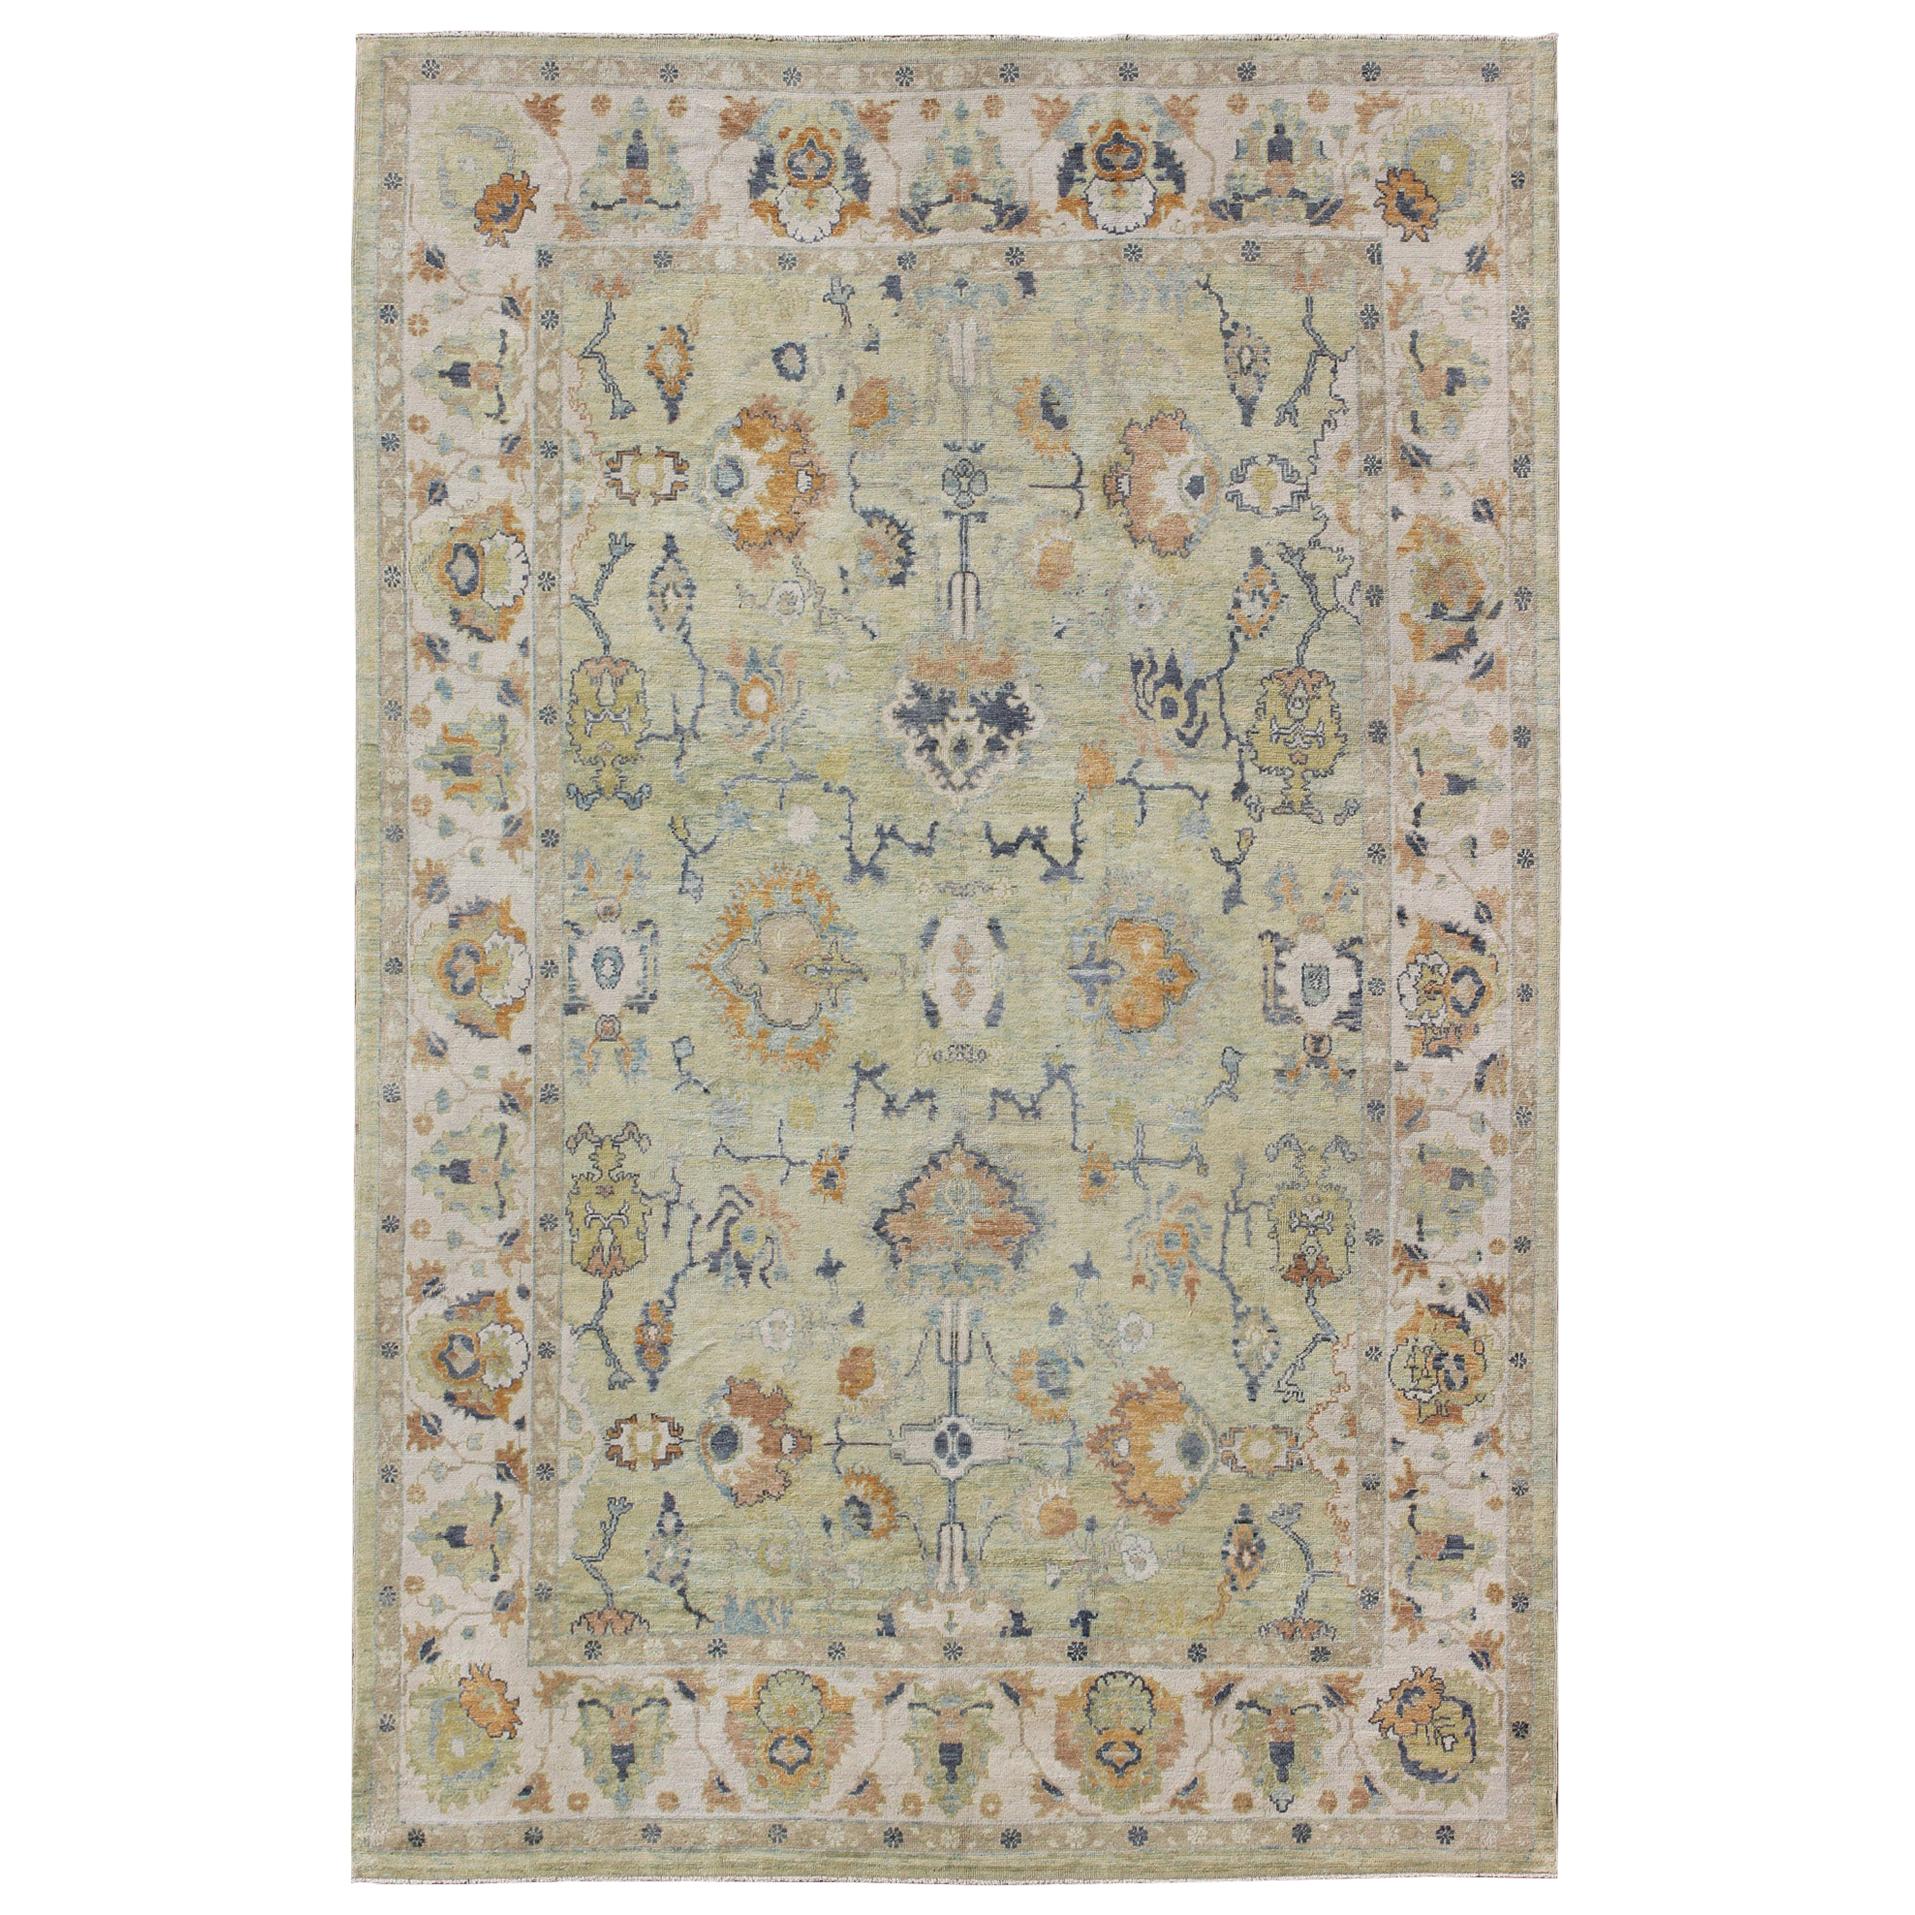 Turkish Oushak Rug with Neutral Color Palette and All-Over Flower Design